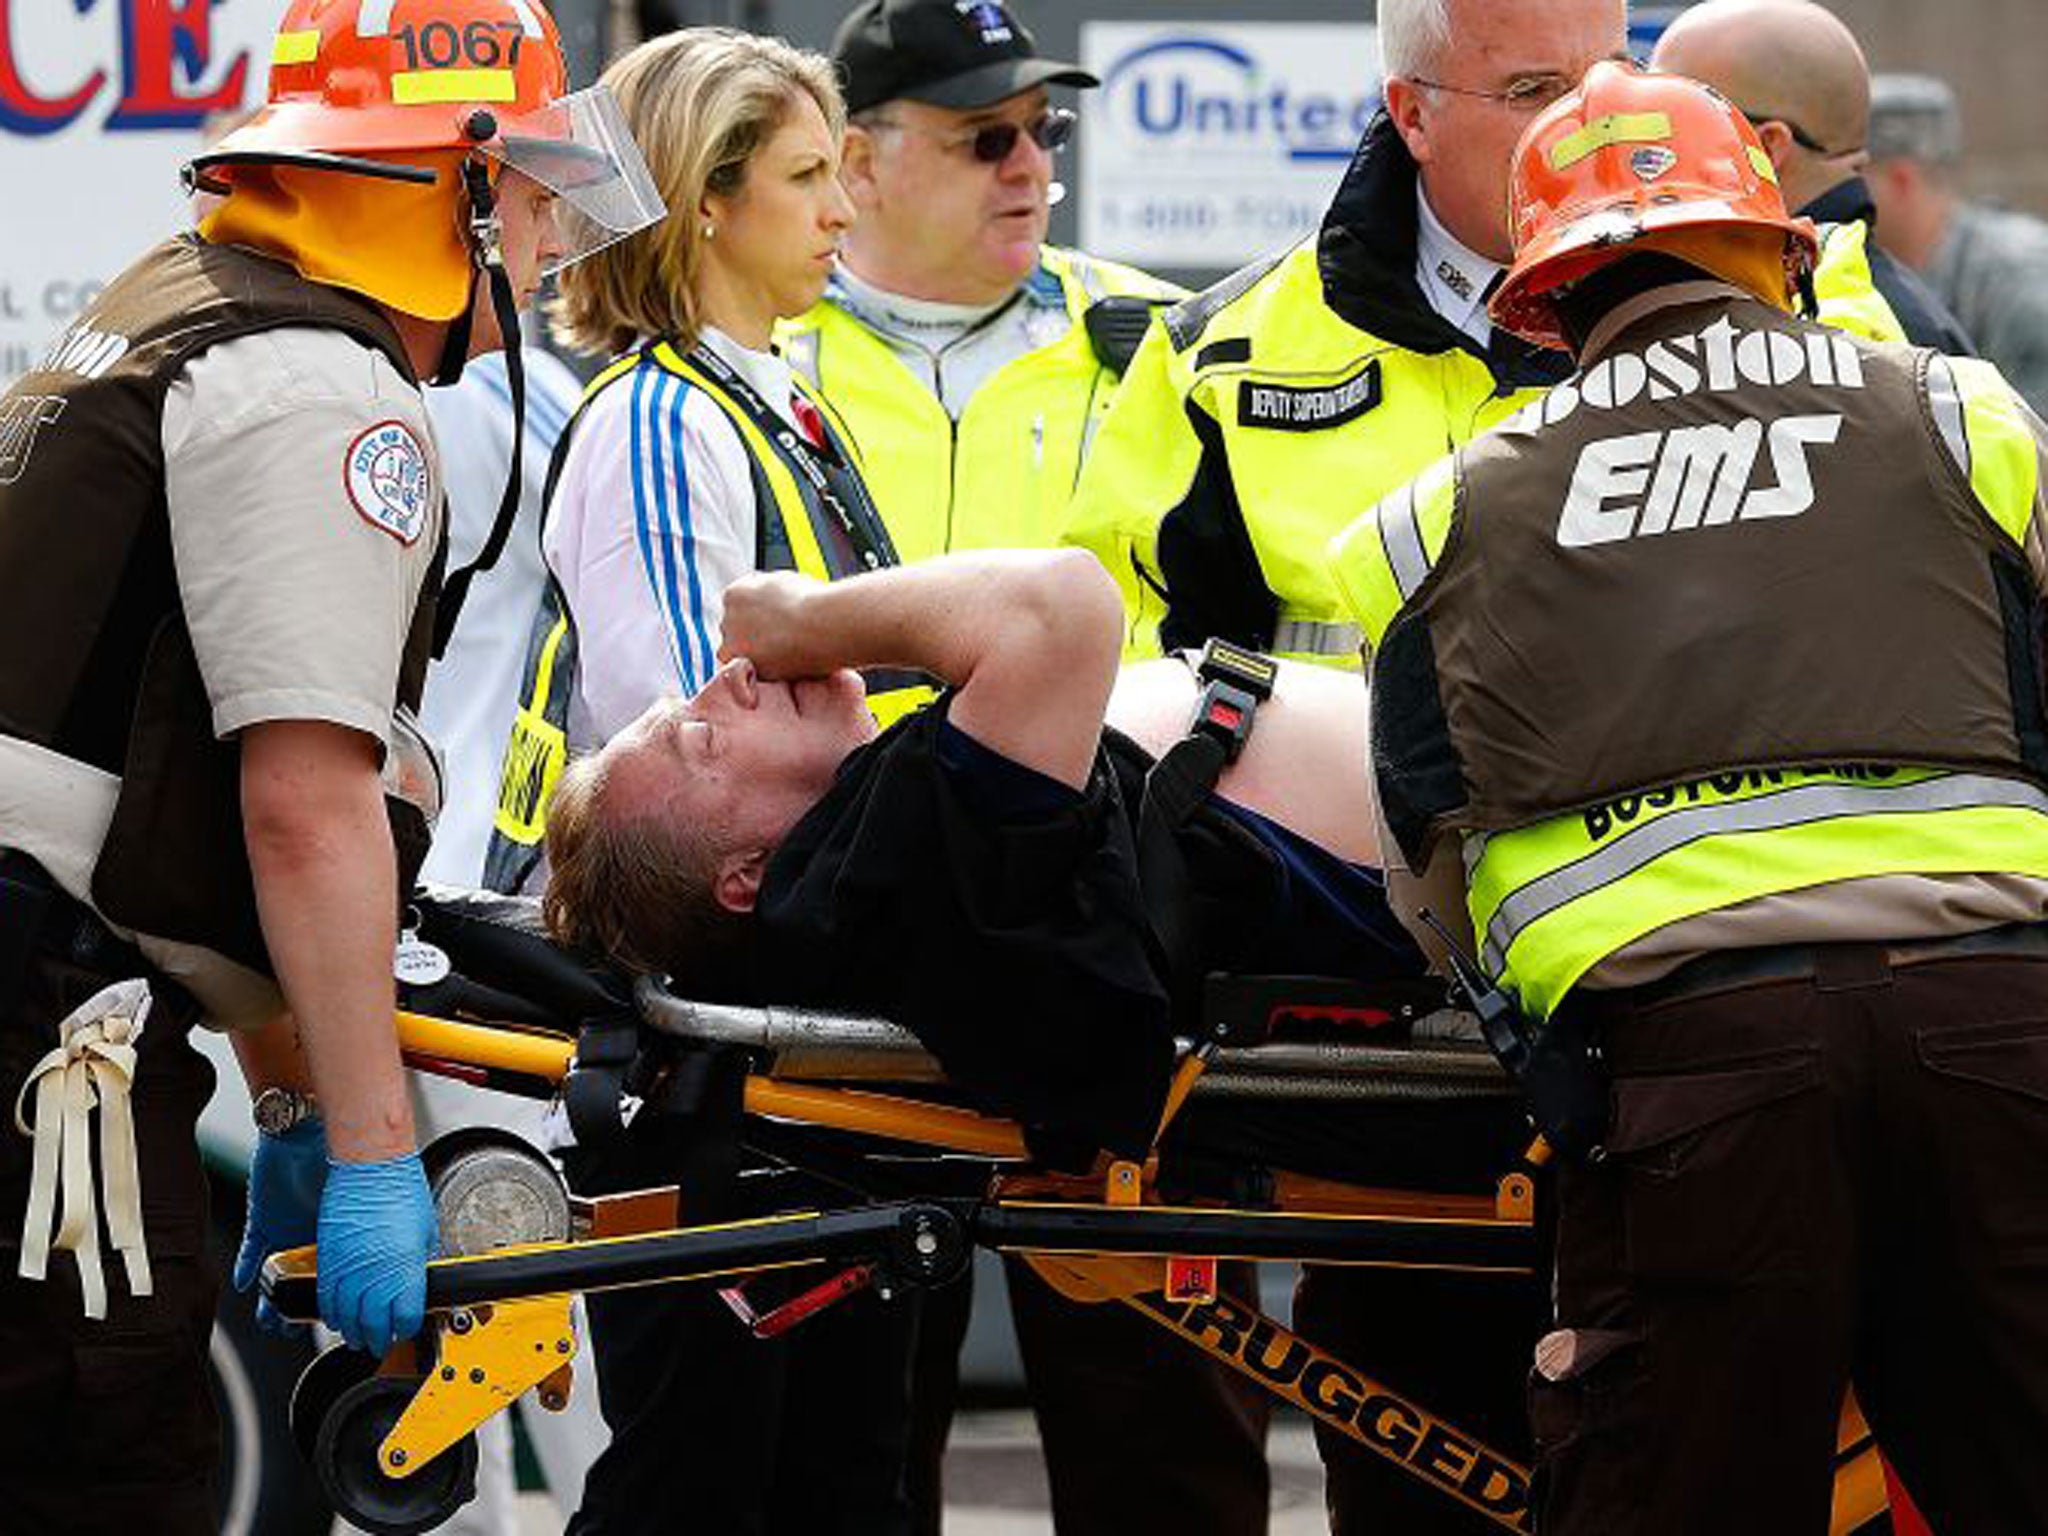 A man is loaded into an ambulance after he was injured by one of two bombs exploded during the 117th Boston Marathon near Copley Square